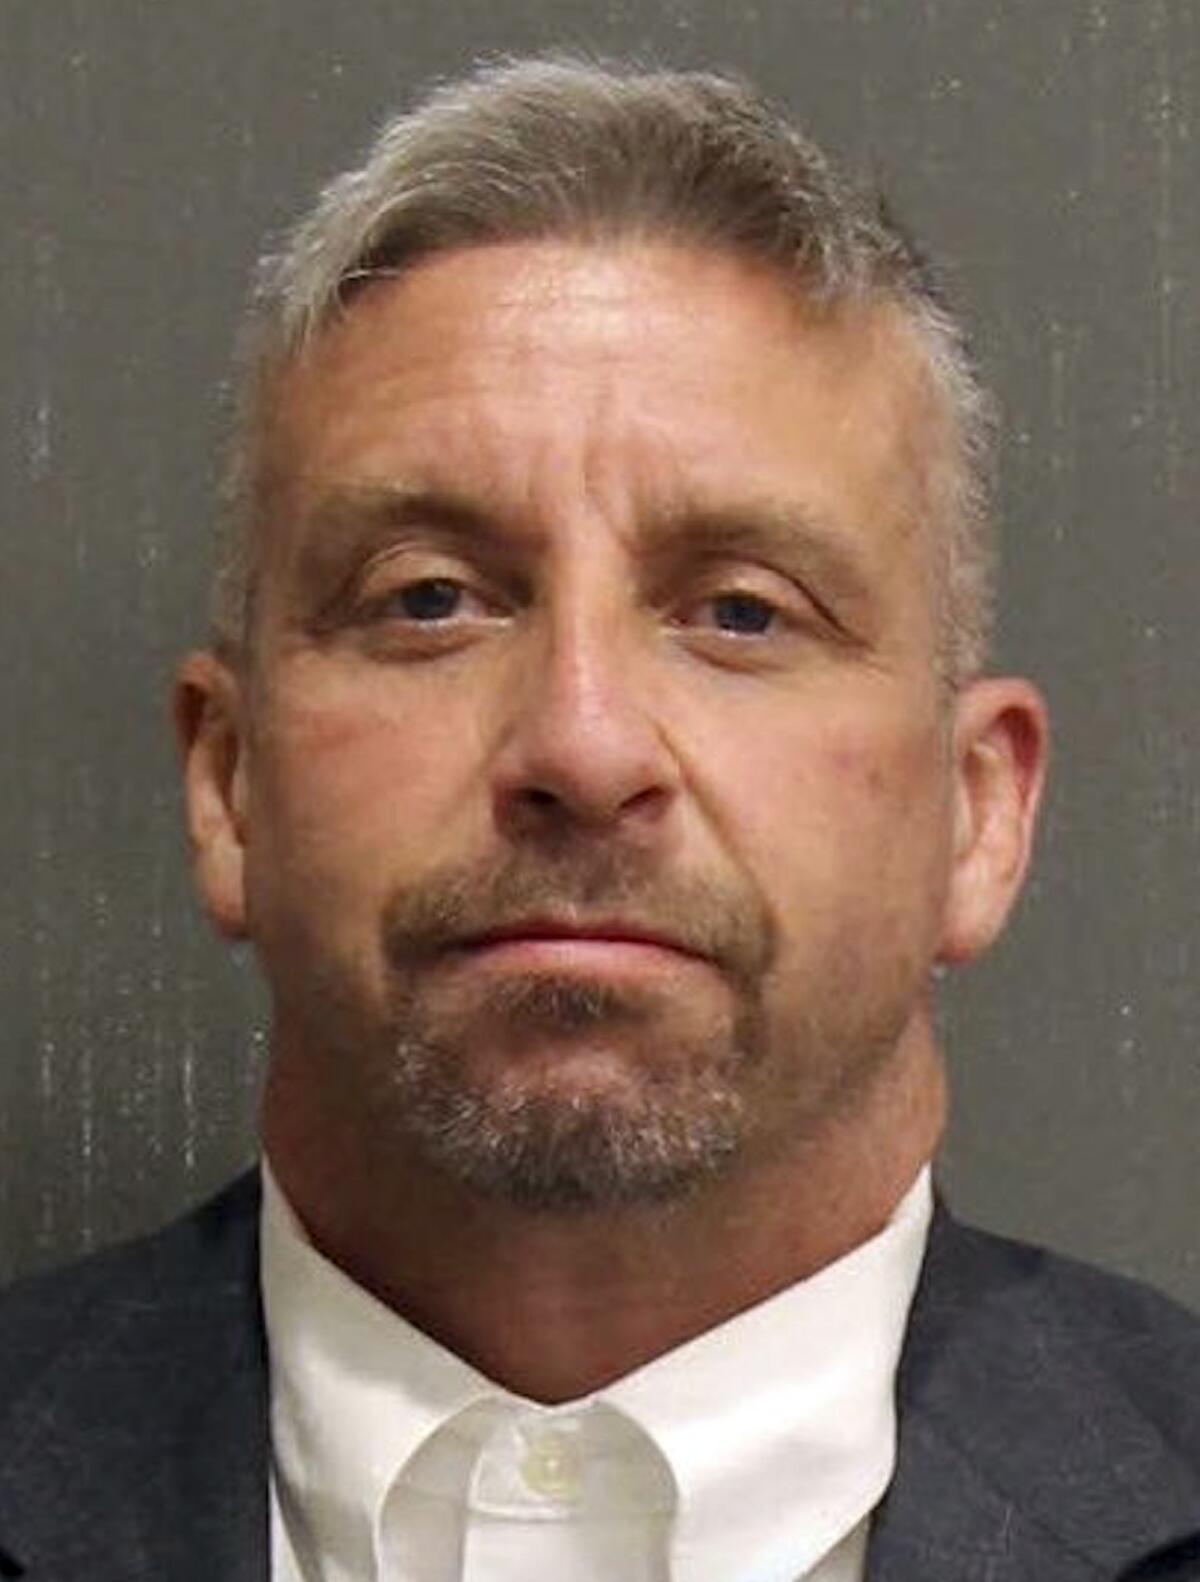 FILE — This image released by the Nashville Police Department shows former Tennessee state trooper Harvey Briggs. Briggs was last seen Monday, Oct. 3, 2022, following his sentencing for a misdemeanor assault conviction for pulling a face mask off a protestor during the COVID-19 pandemic in Aug. 2020. (Nashville Police Department via AP, File)